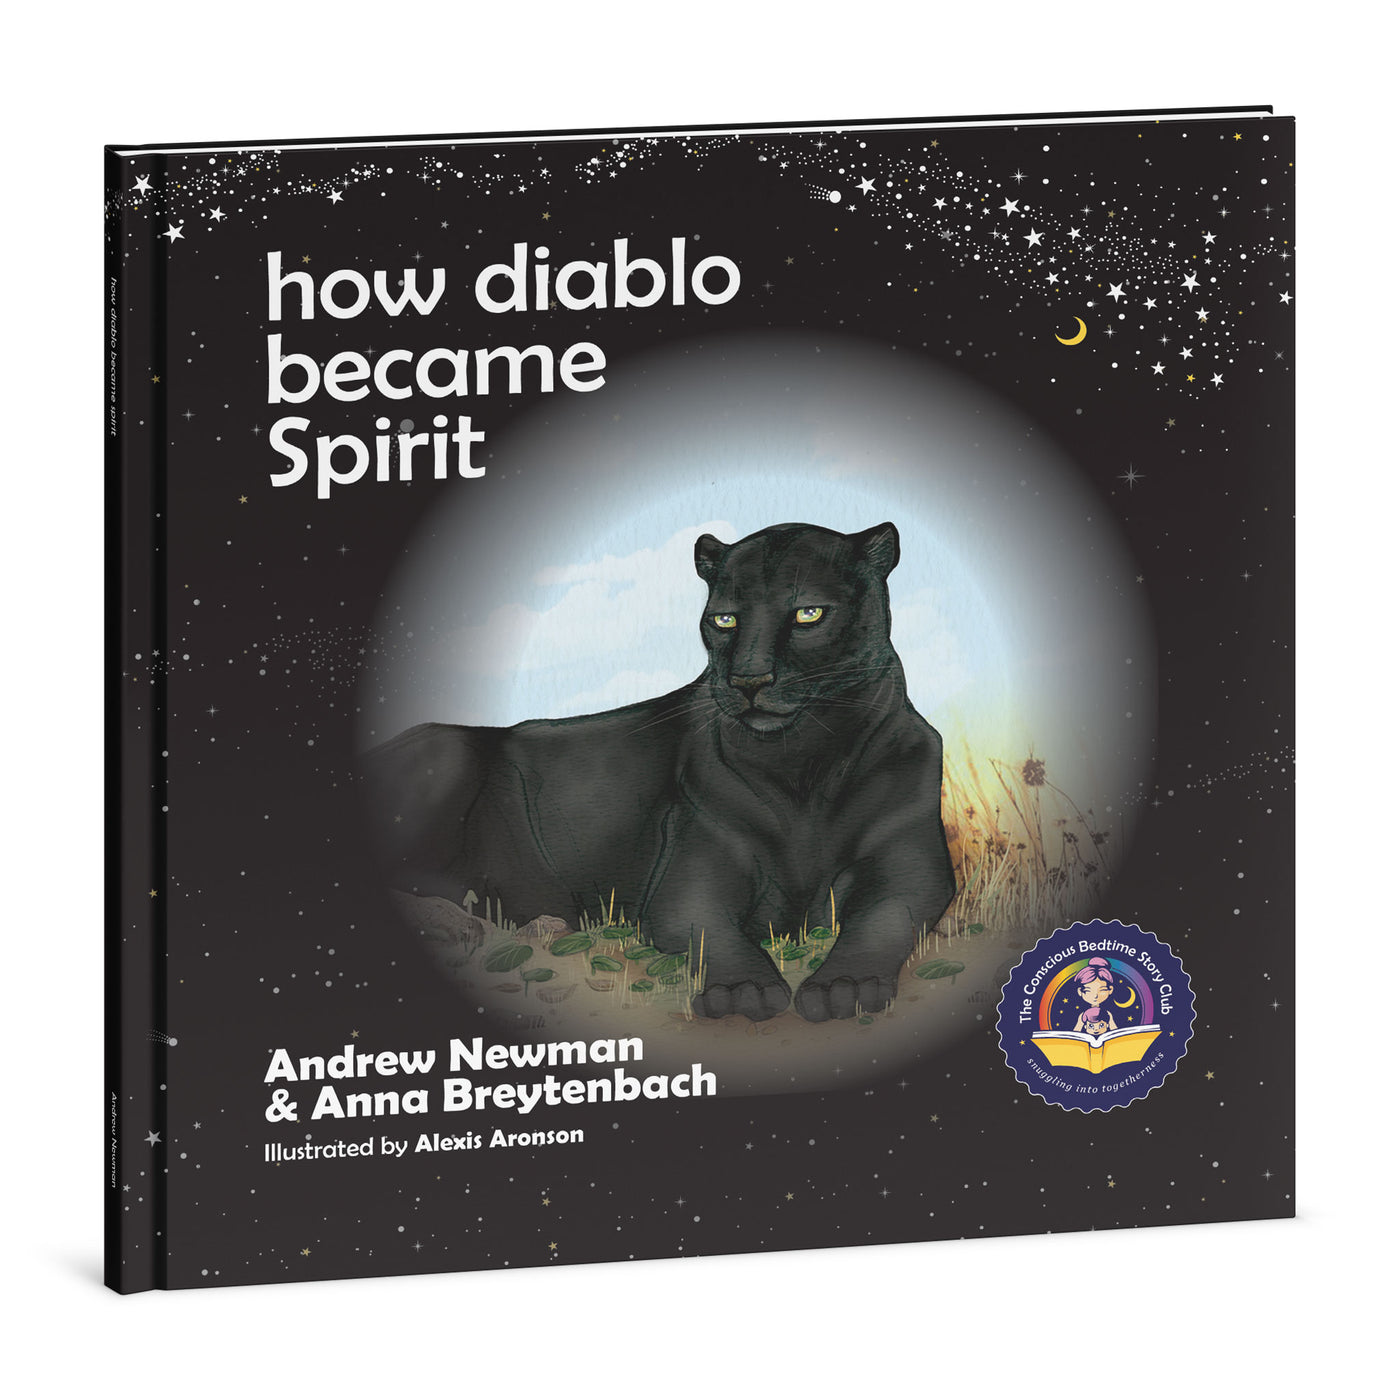 How Diablo Became Spirit: How to connect with animals and respect all beings